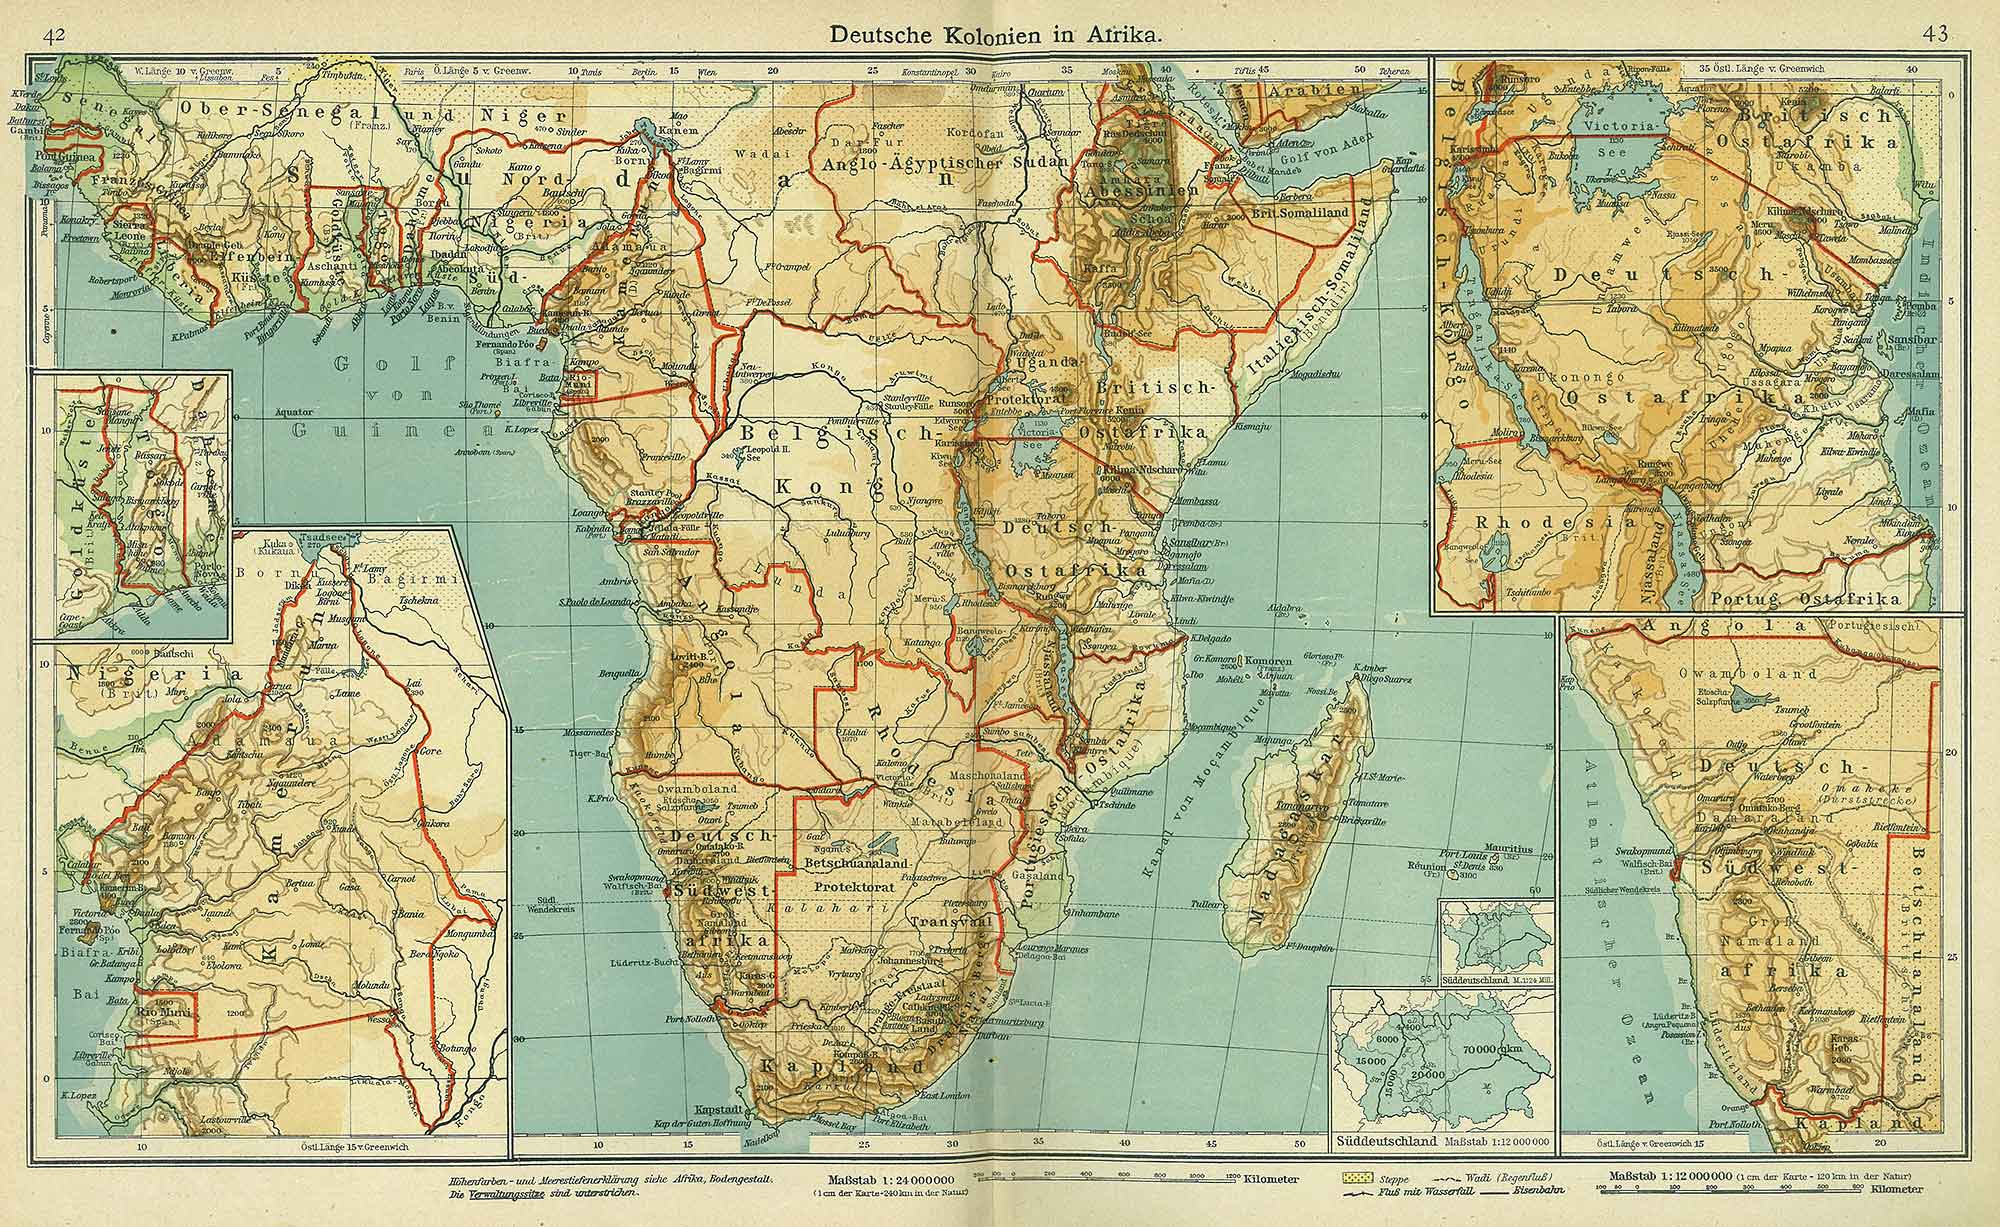 German colonies in Africa, Andrees 'Berliner Schul-Atlas', 1916, pages 42 to 43, published size to print borders 44.05 cm wide by 26.41 cm high.